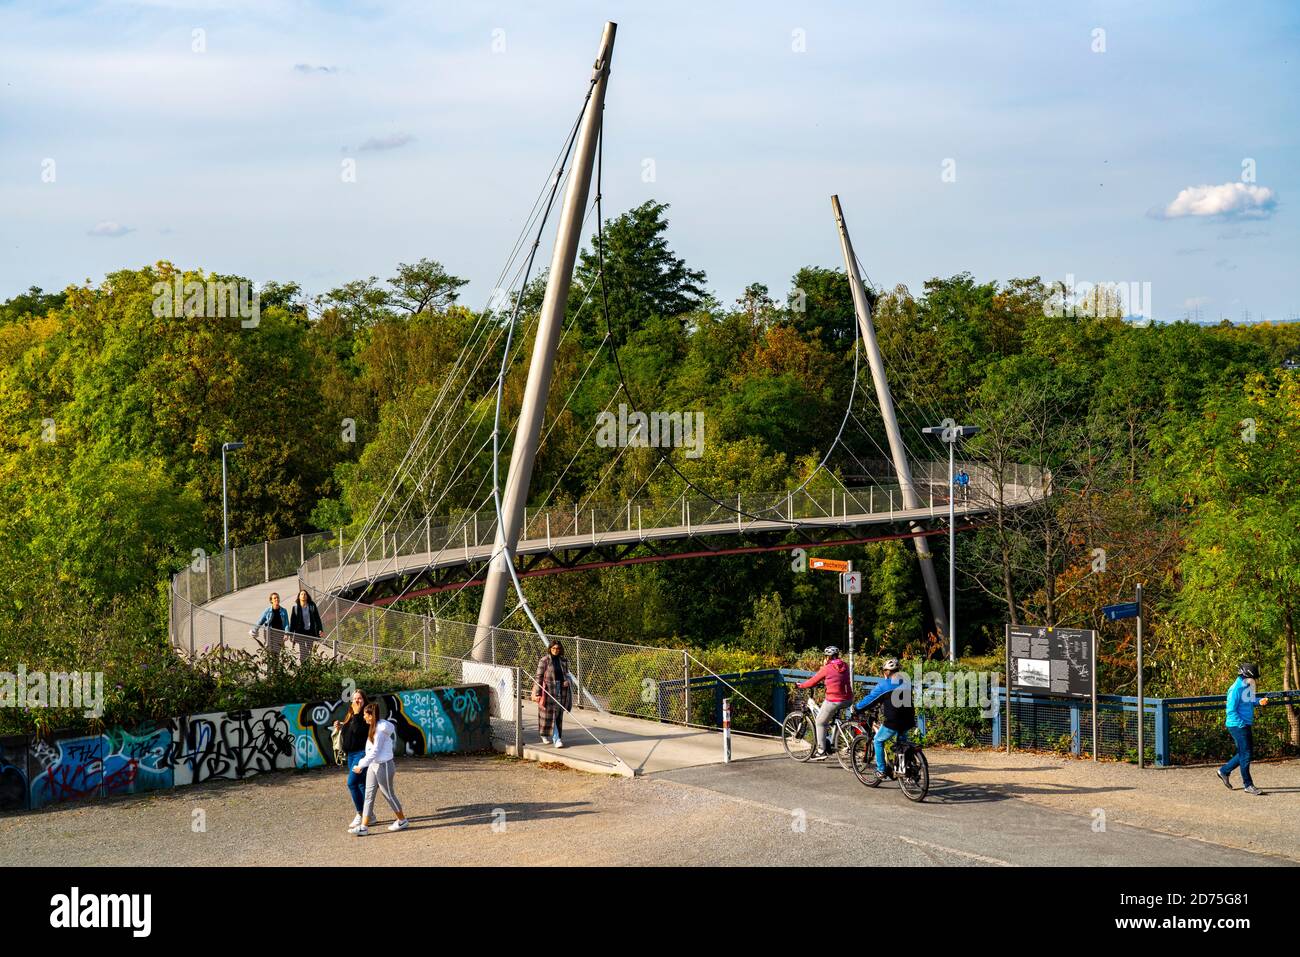 The Erzbahnschwinge, starting point of the cycle path Erzbahntrasse, in the Westpark in Bochum, former steel mill site in the western city centre, NRW Stock Photo